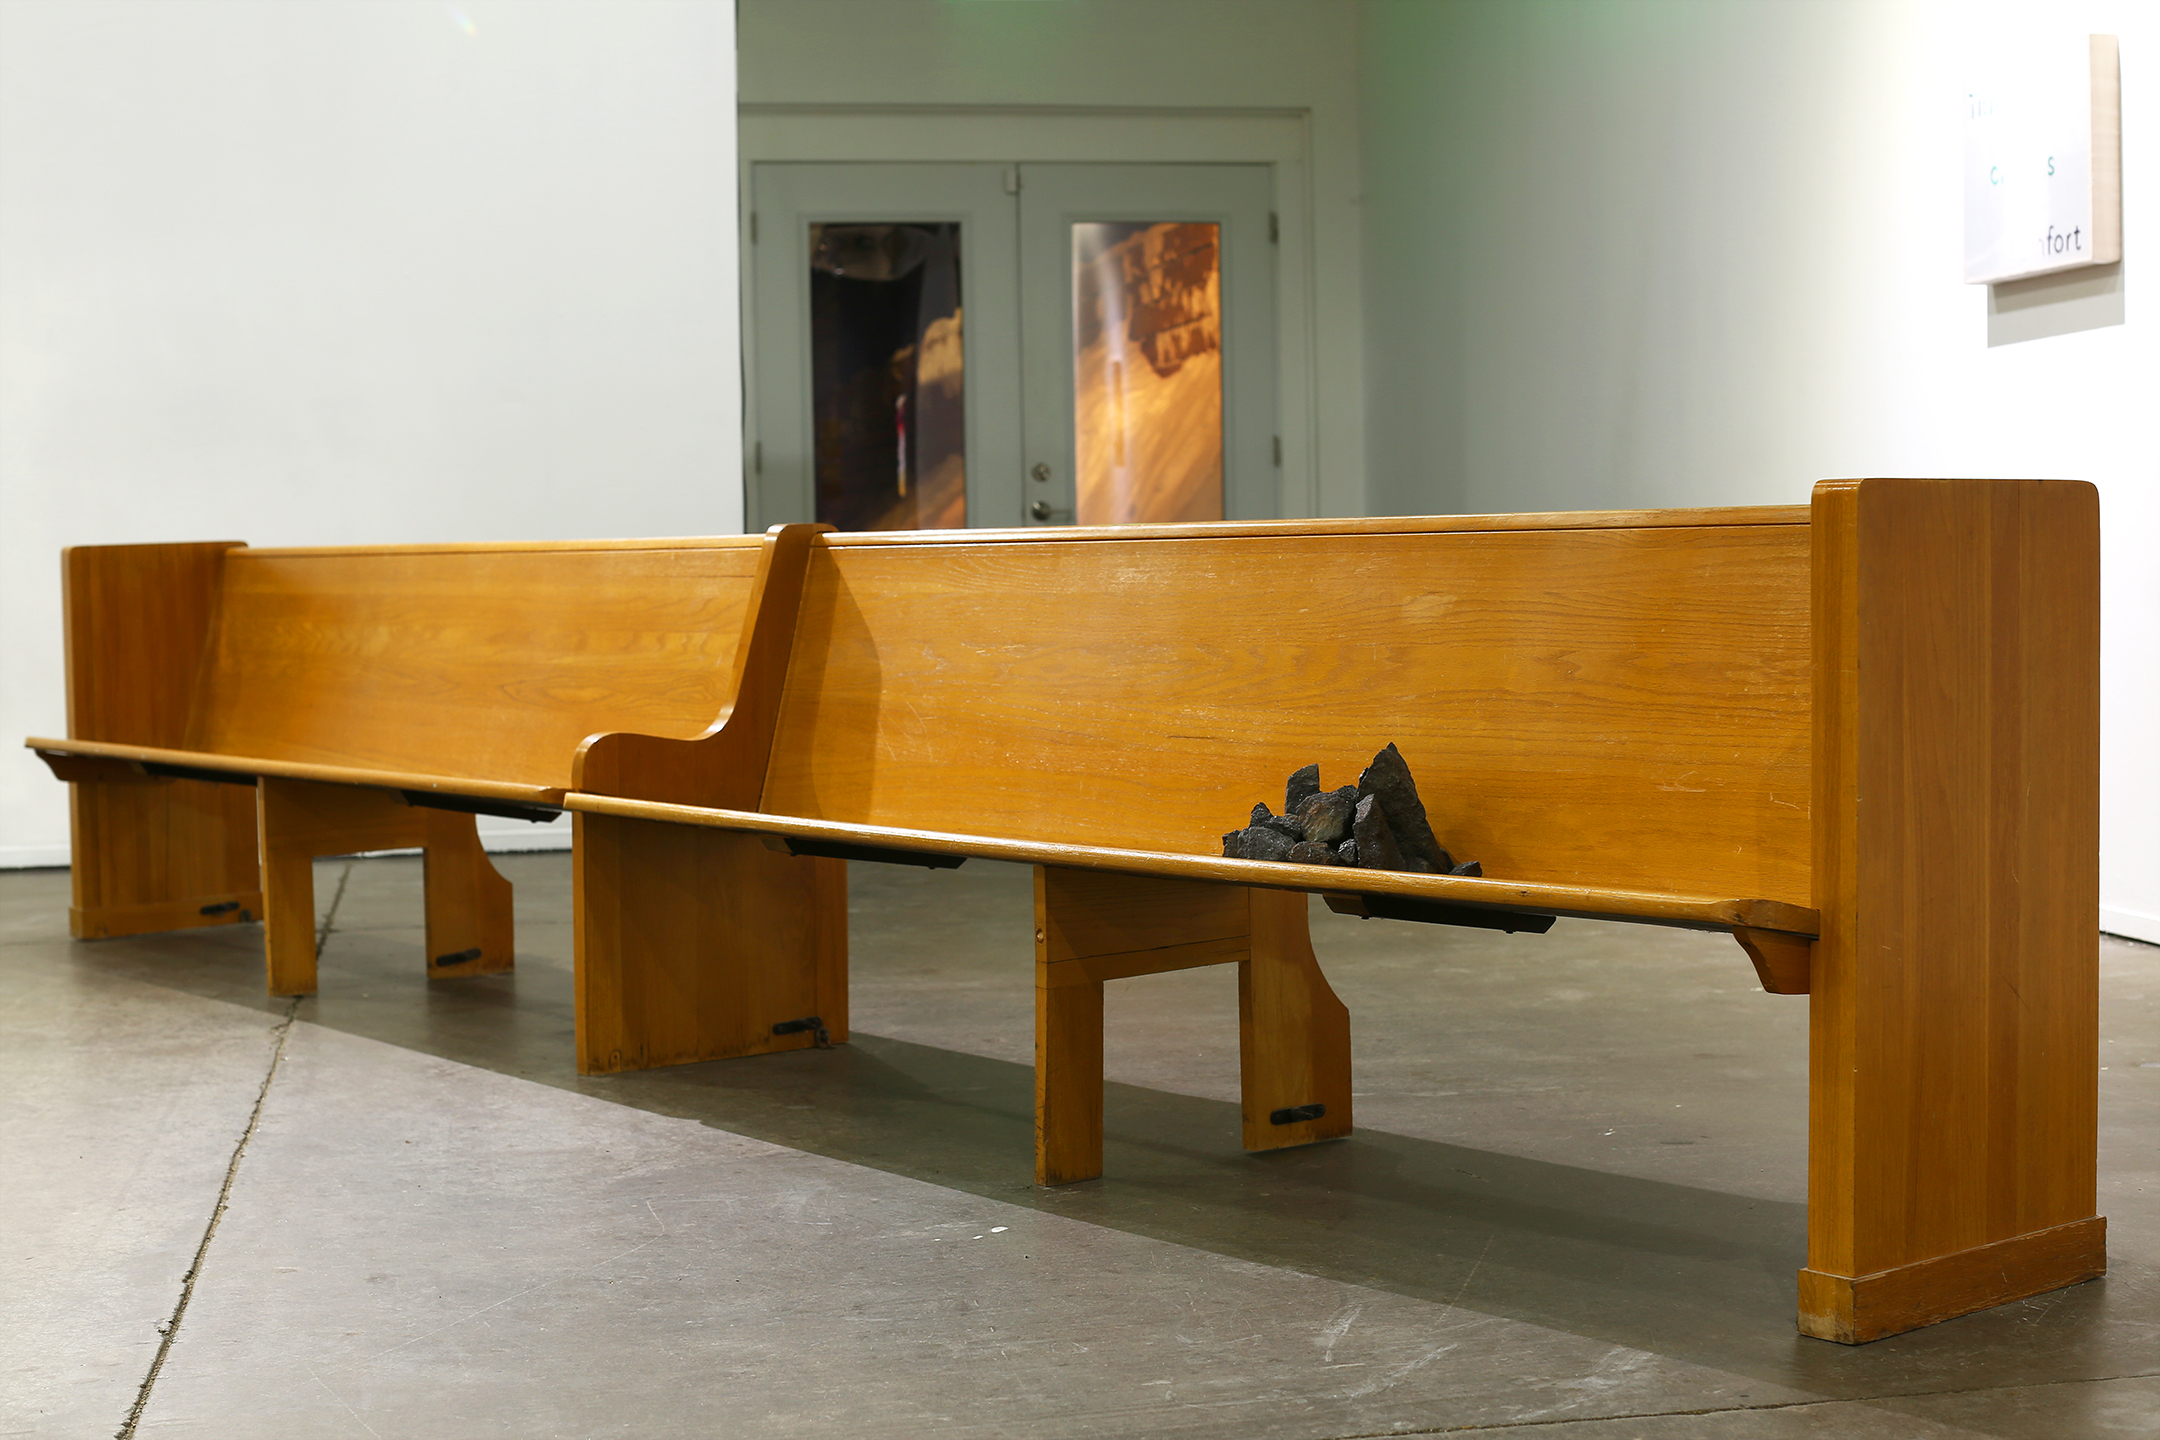   Peace be with you  1950’s Roman Catholic wood oak church pew, iron ore, peacock feathers 181” x 32” x 21” 2018 